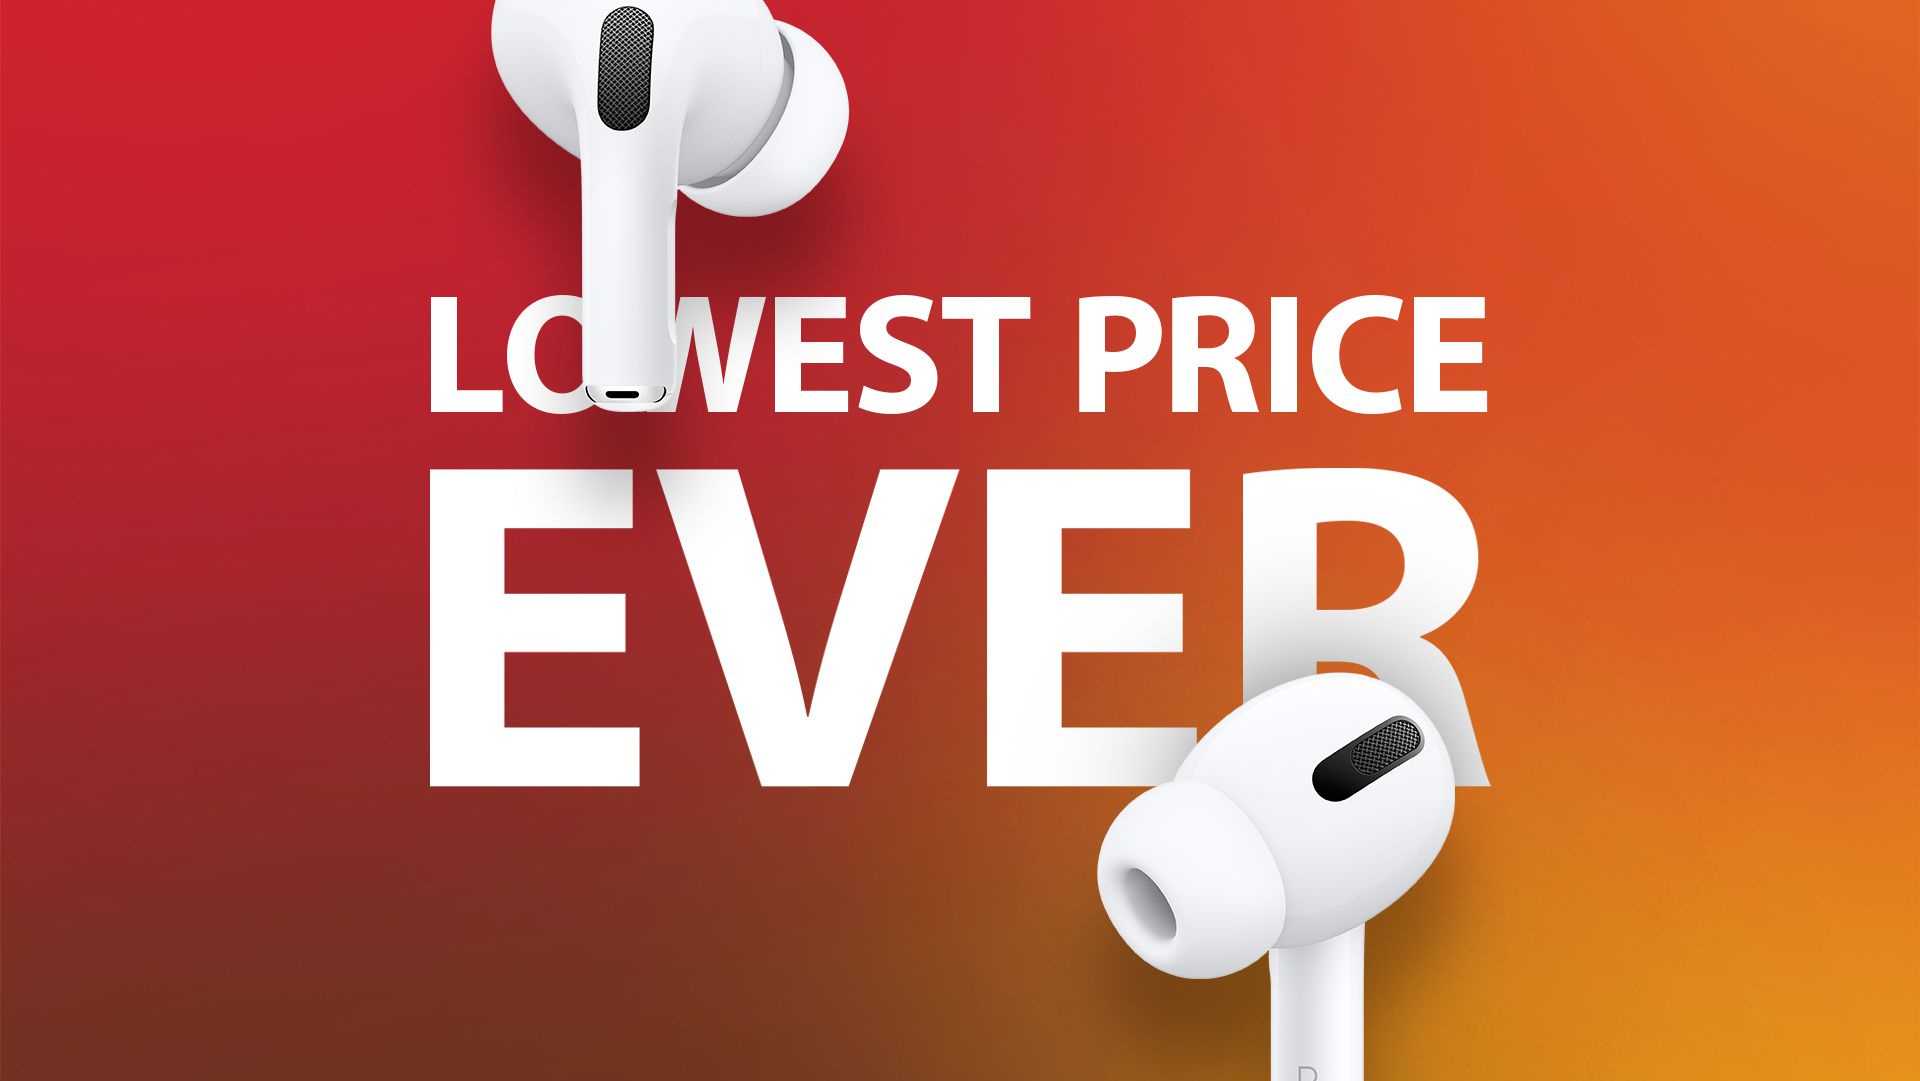 Black Friday 2020: AirPods Pro reach their lowest price ever [Updated]